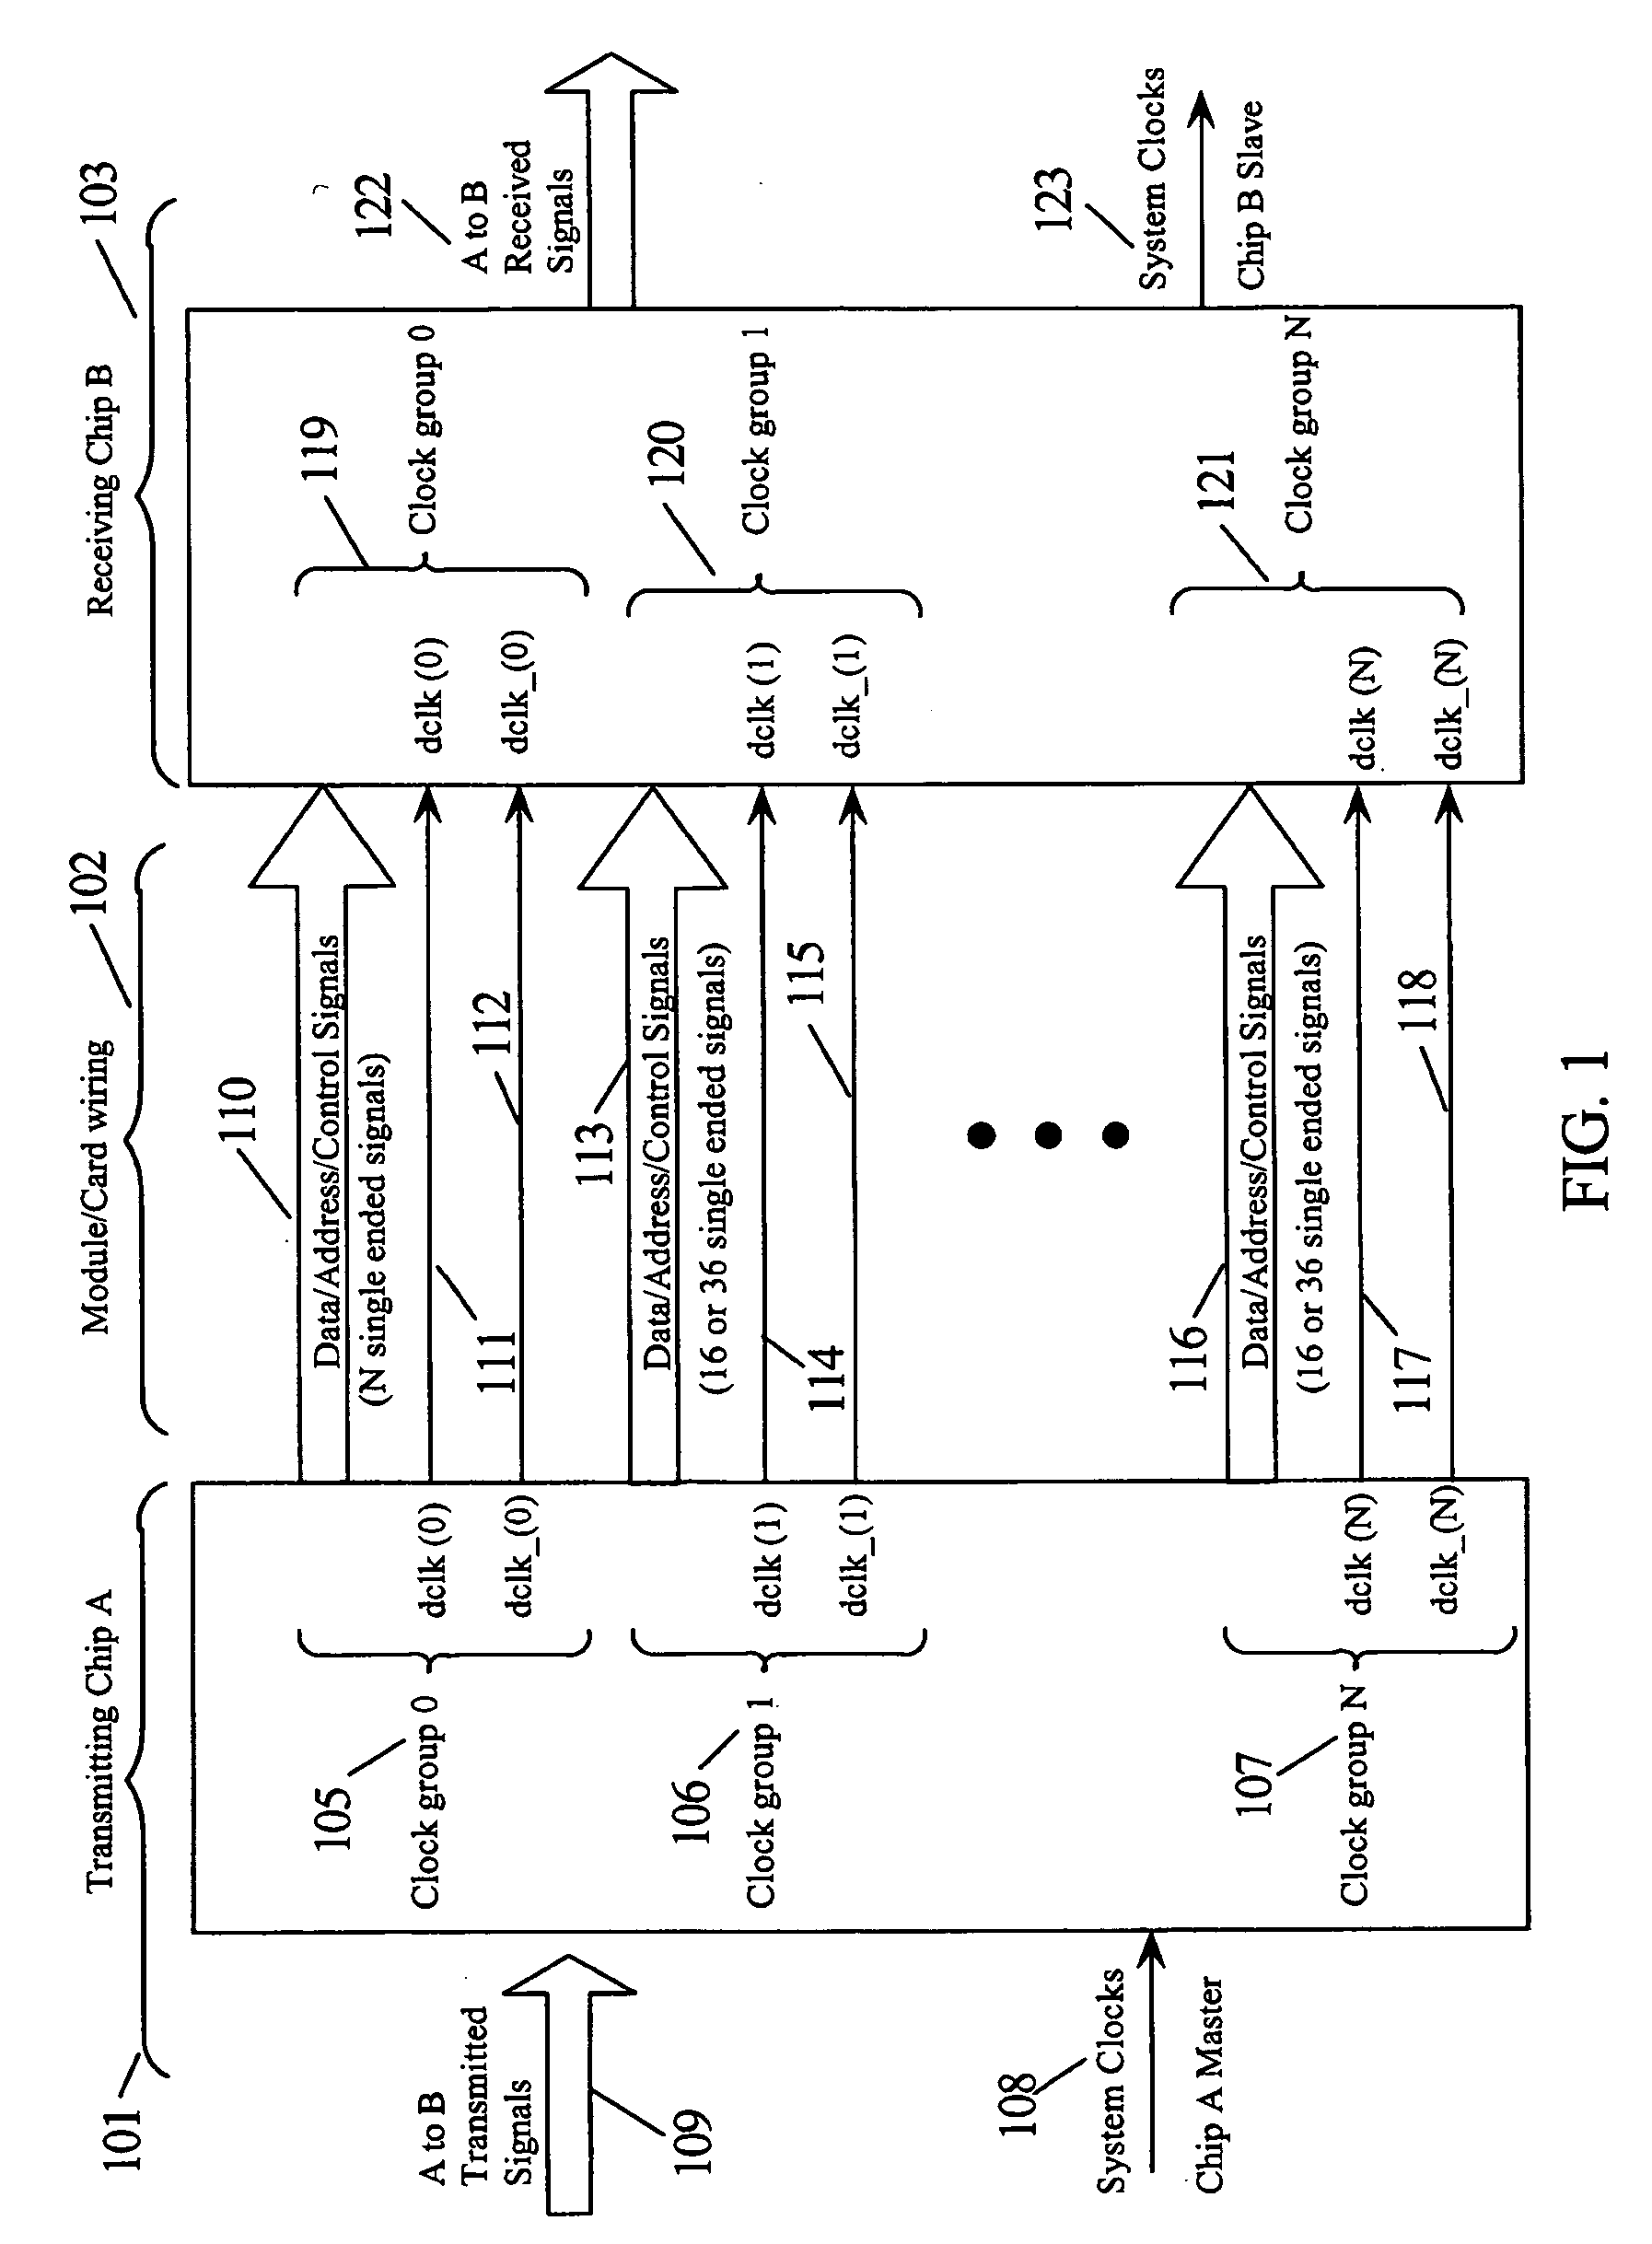 Circuit for optimizing the duty cycle of a received clock transmitted over a transmission line